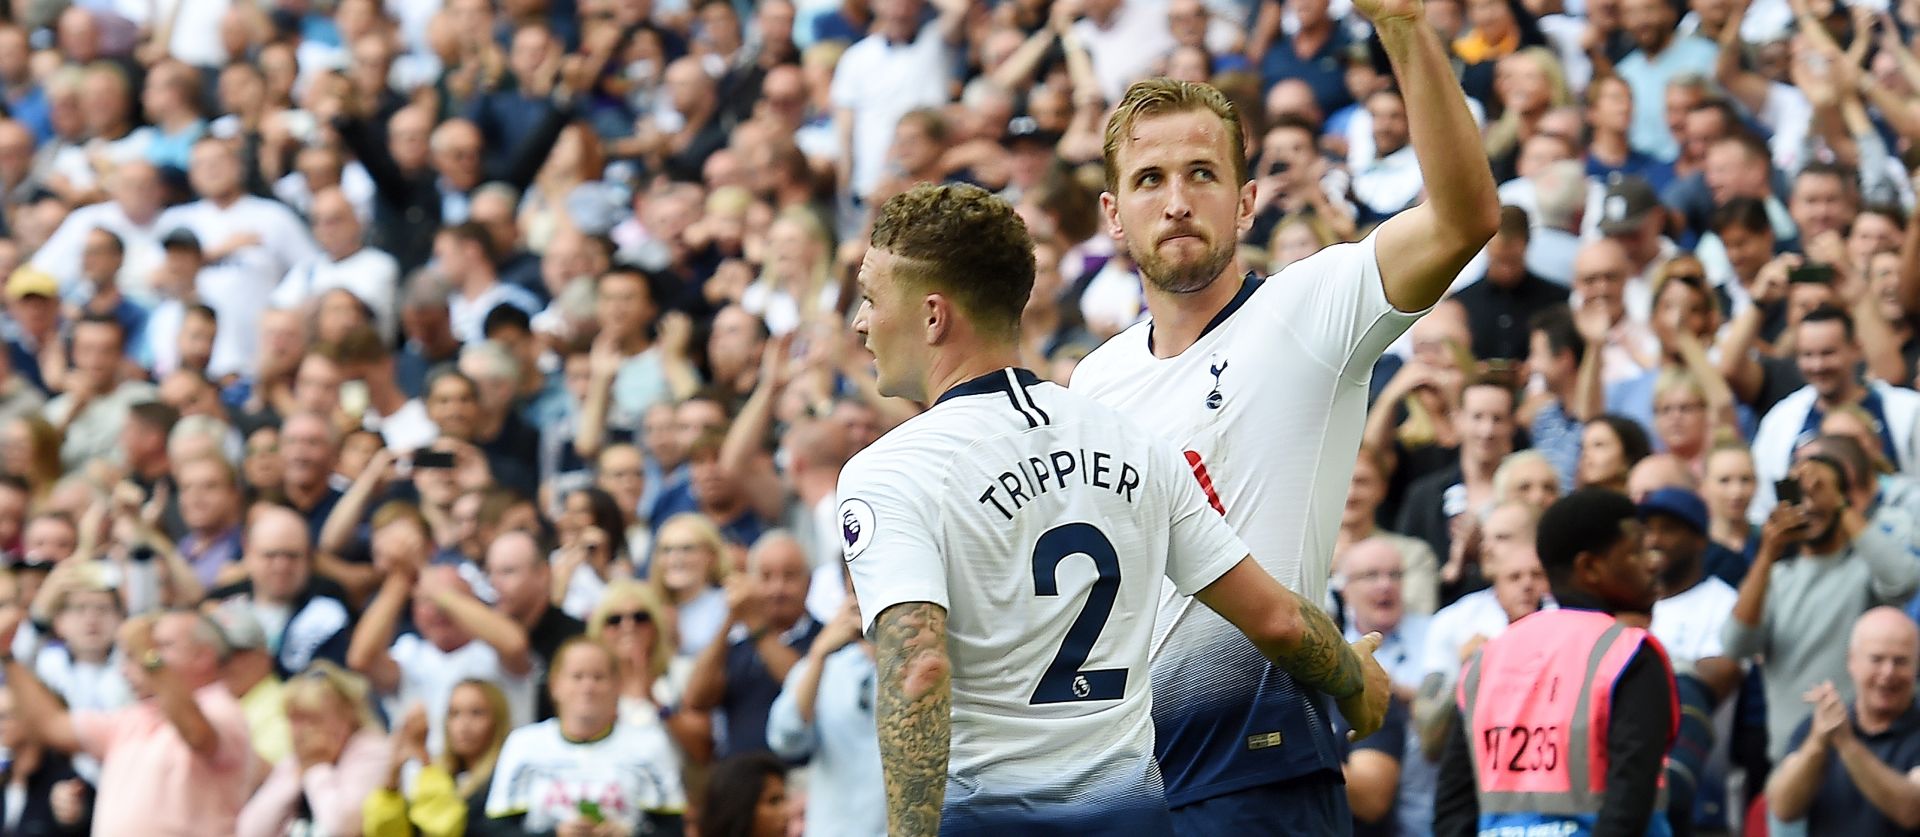 epa06956480 Tottenham's Harry Kane (R) celebrates with team mate Kieran Trippier (L) after scoring his teams third goal against Fulham during the English Premier League soccer match Tottenham vs Fulham at Wembley Stadium in London, Britain, 18 August 2018.  EPA/ANDY RAIN EDITORIAL USE ONLY. No use with unauthorized audio, video, data, fixture lists, club/league logos or 'live' services. Online in-match use limited to 120 images, no video emulation. No use in betting, games or single club/league/player publications.